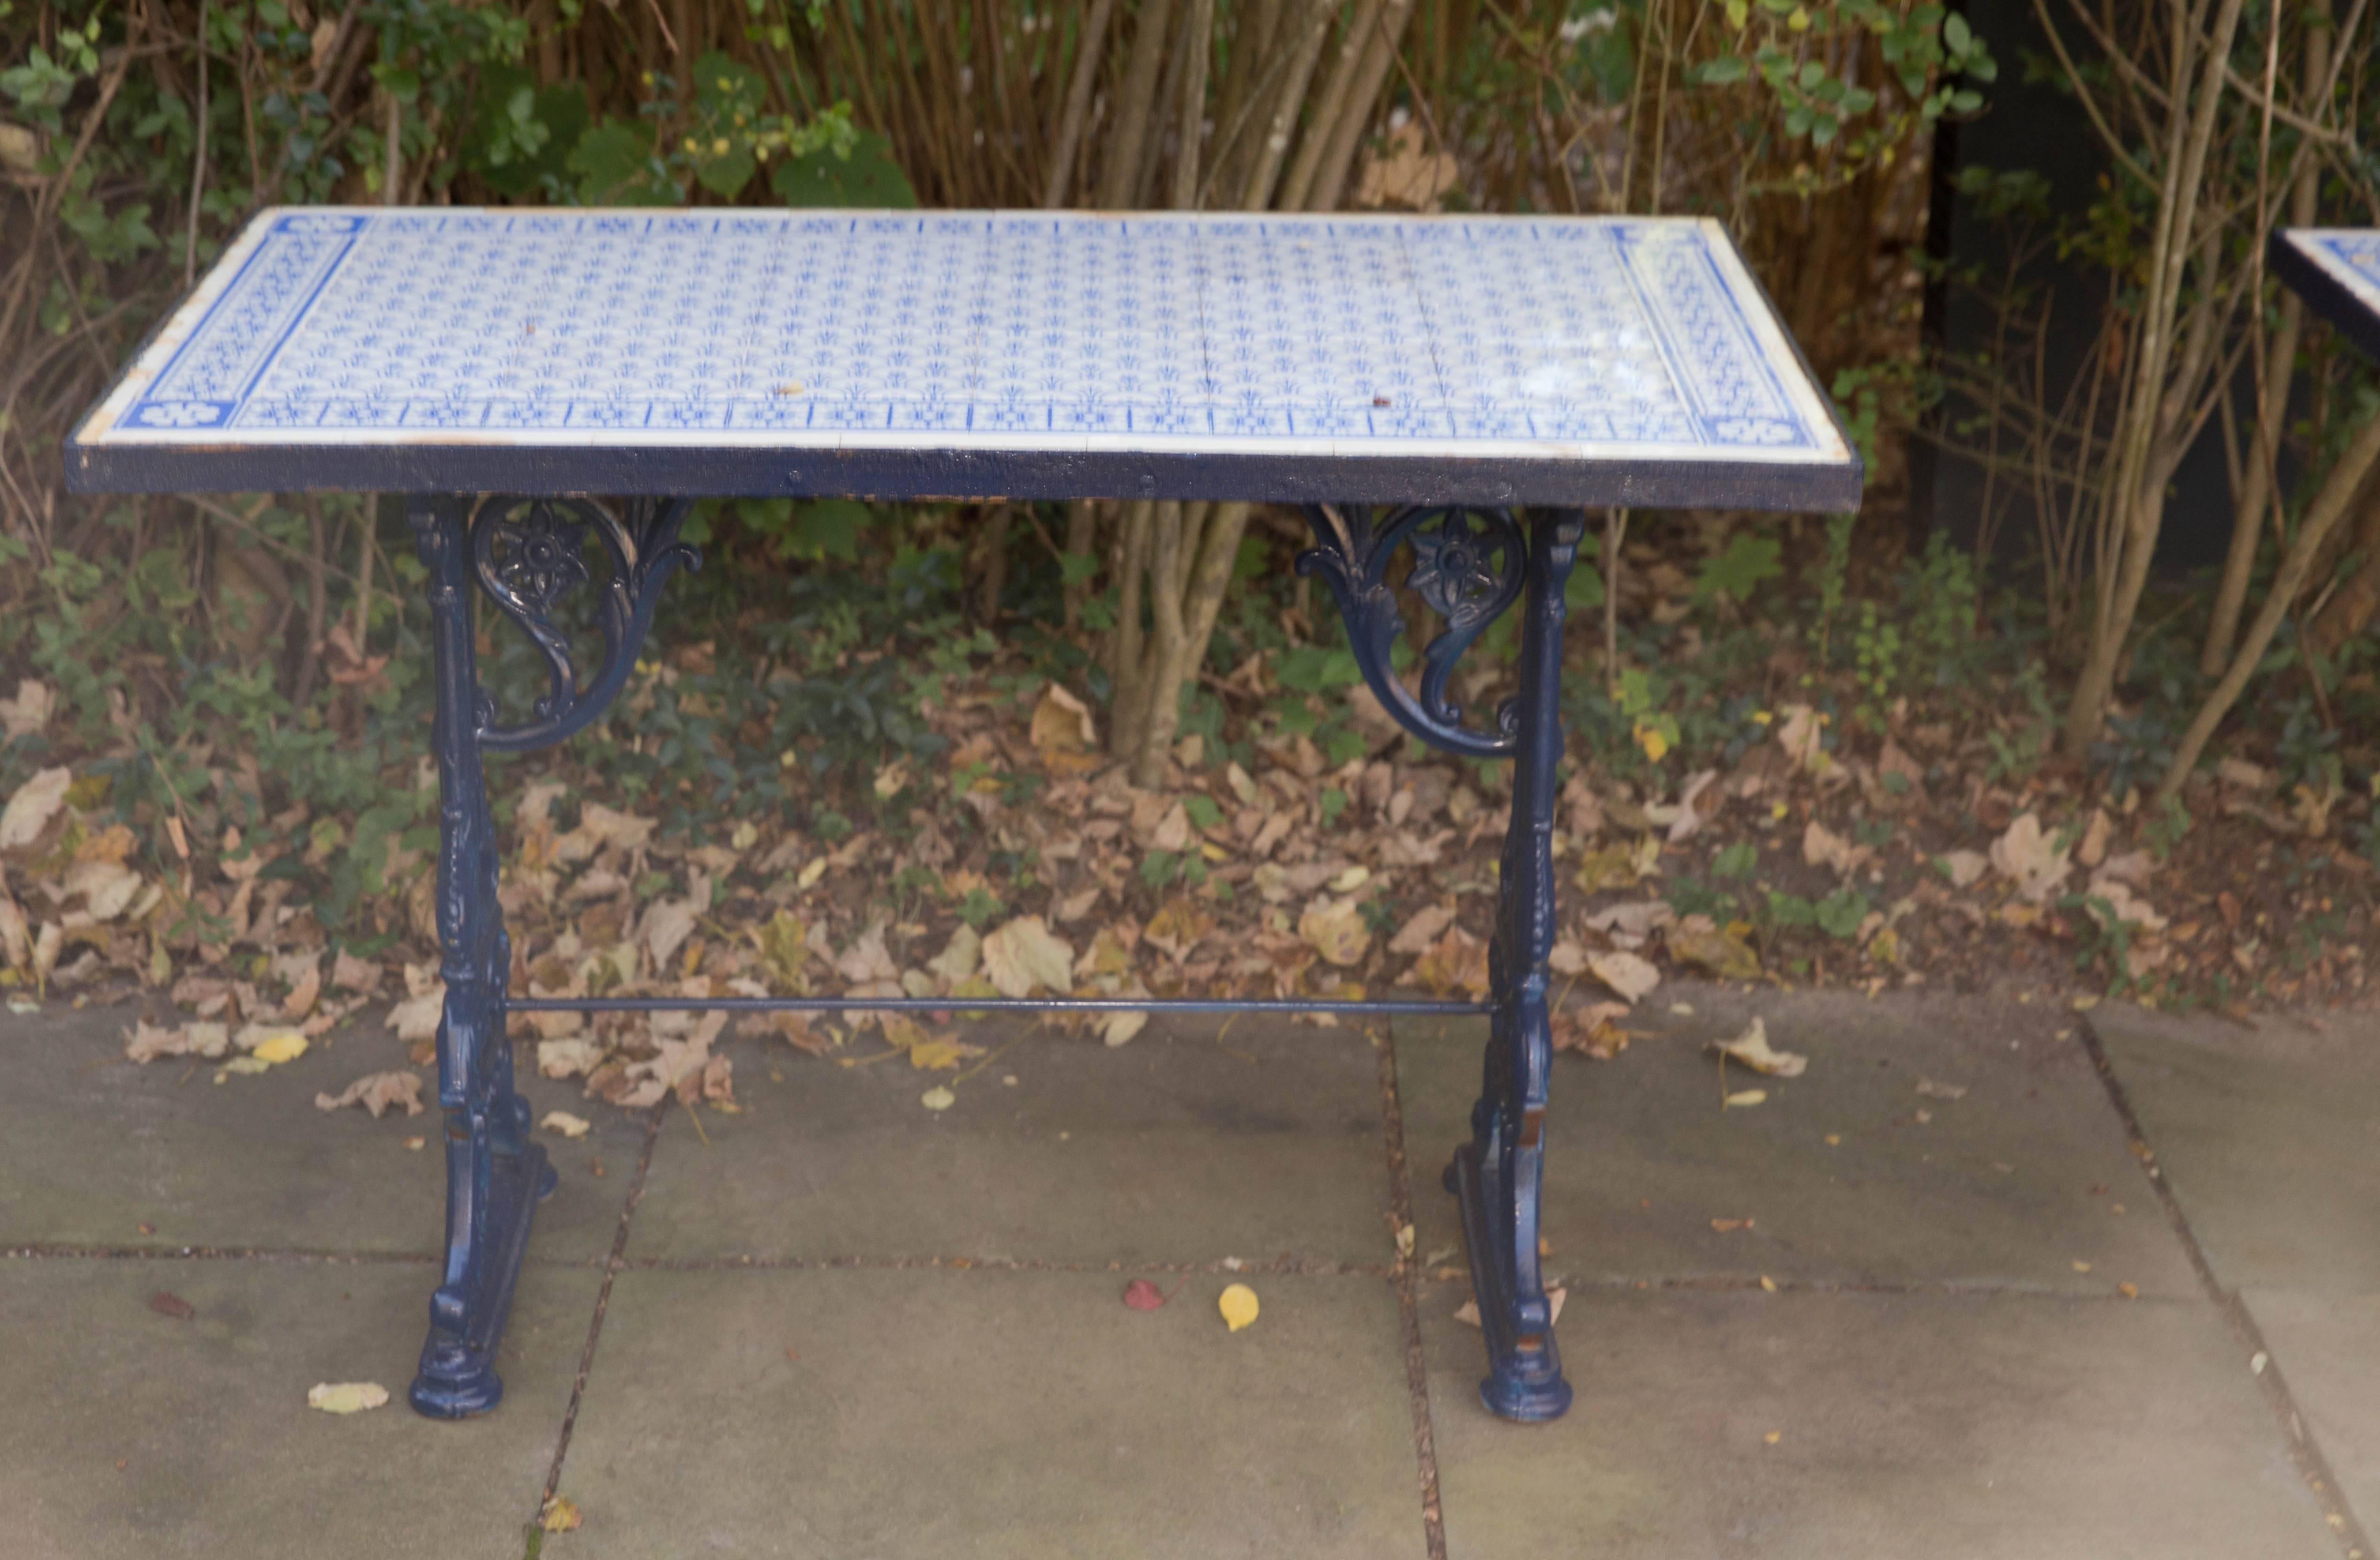 Pair of English Victorian blue painted cast iron pub table consoles in the aesthetic taste with Spanish or Moroccan blue and white tile tops. The base has flower motif support brackets. The tops are iron bound cement with inlaid tiles. The tiles